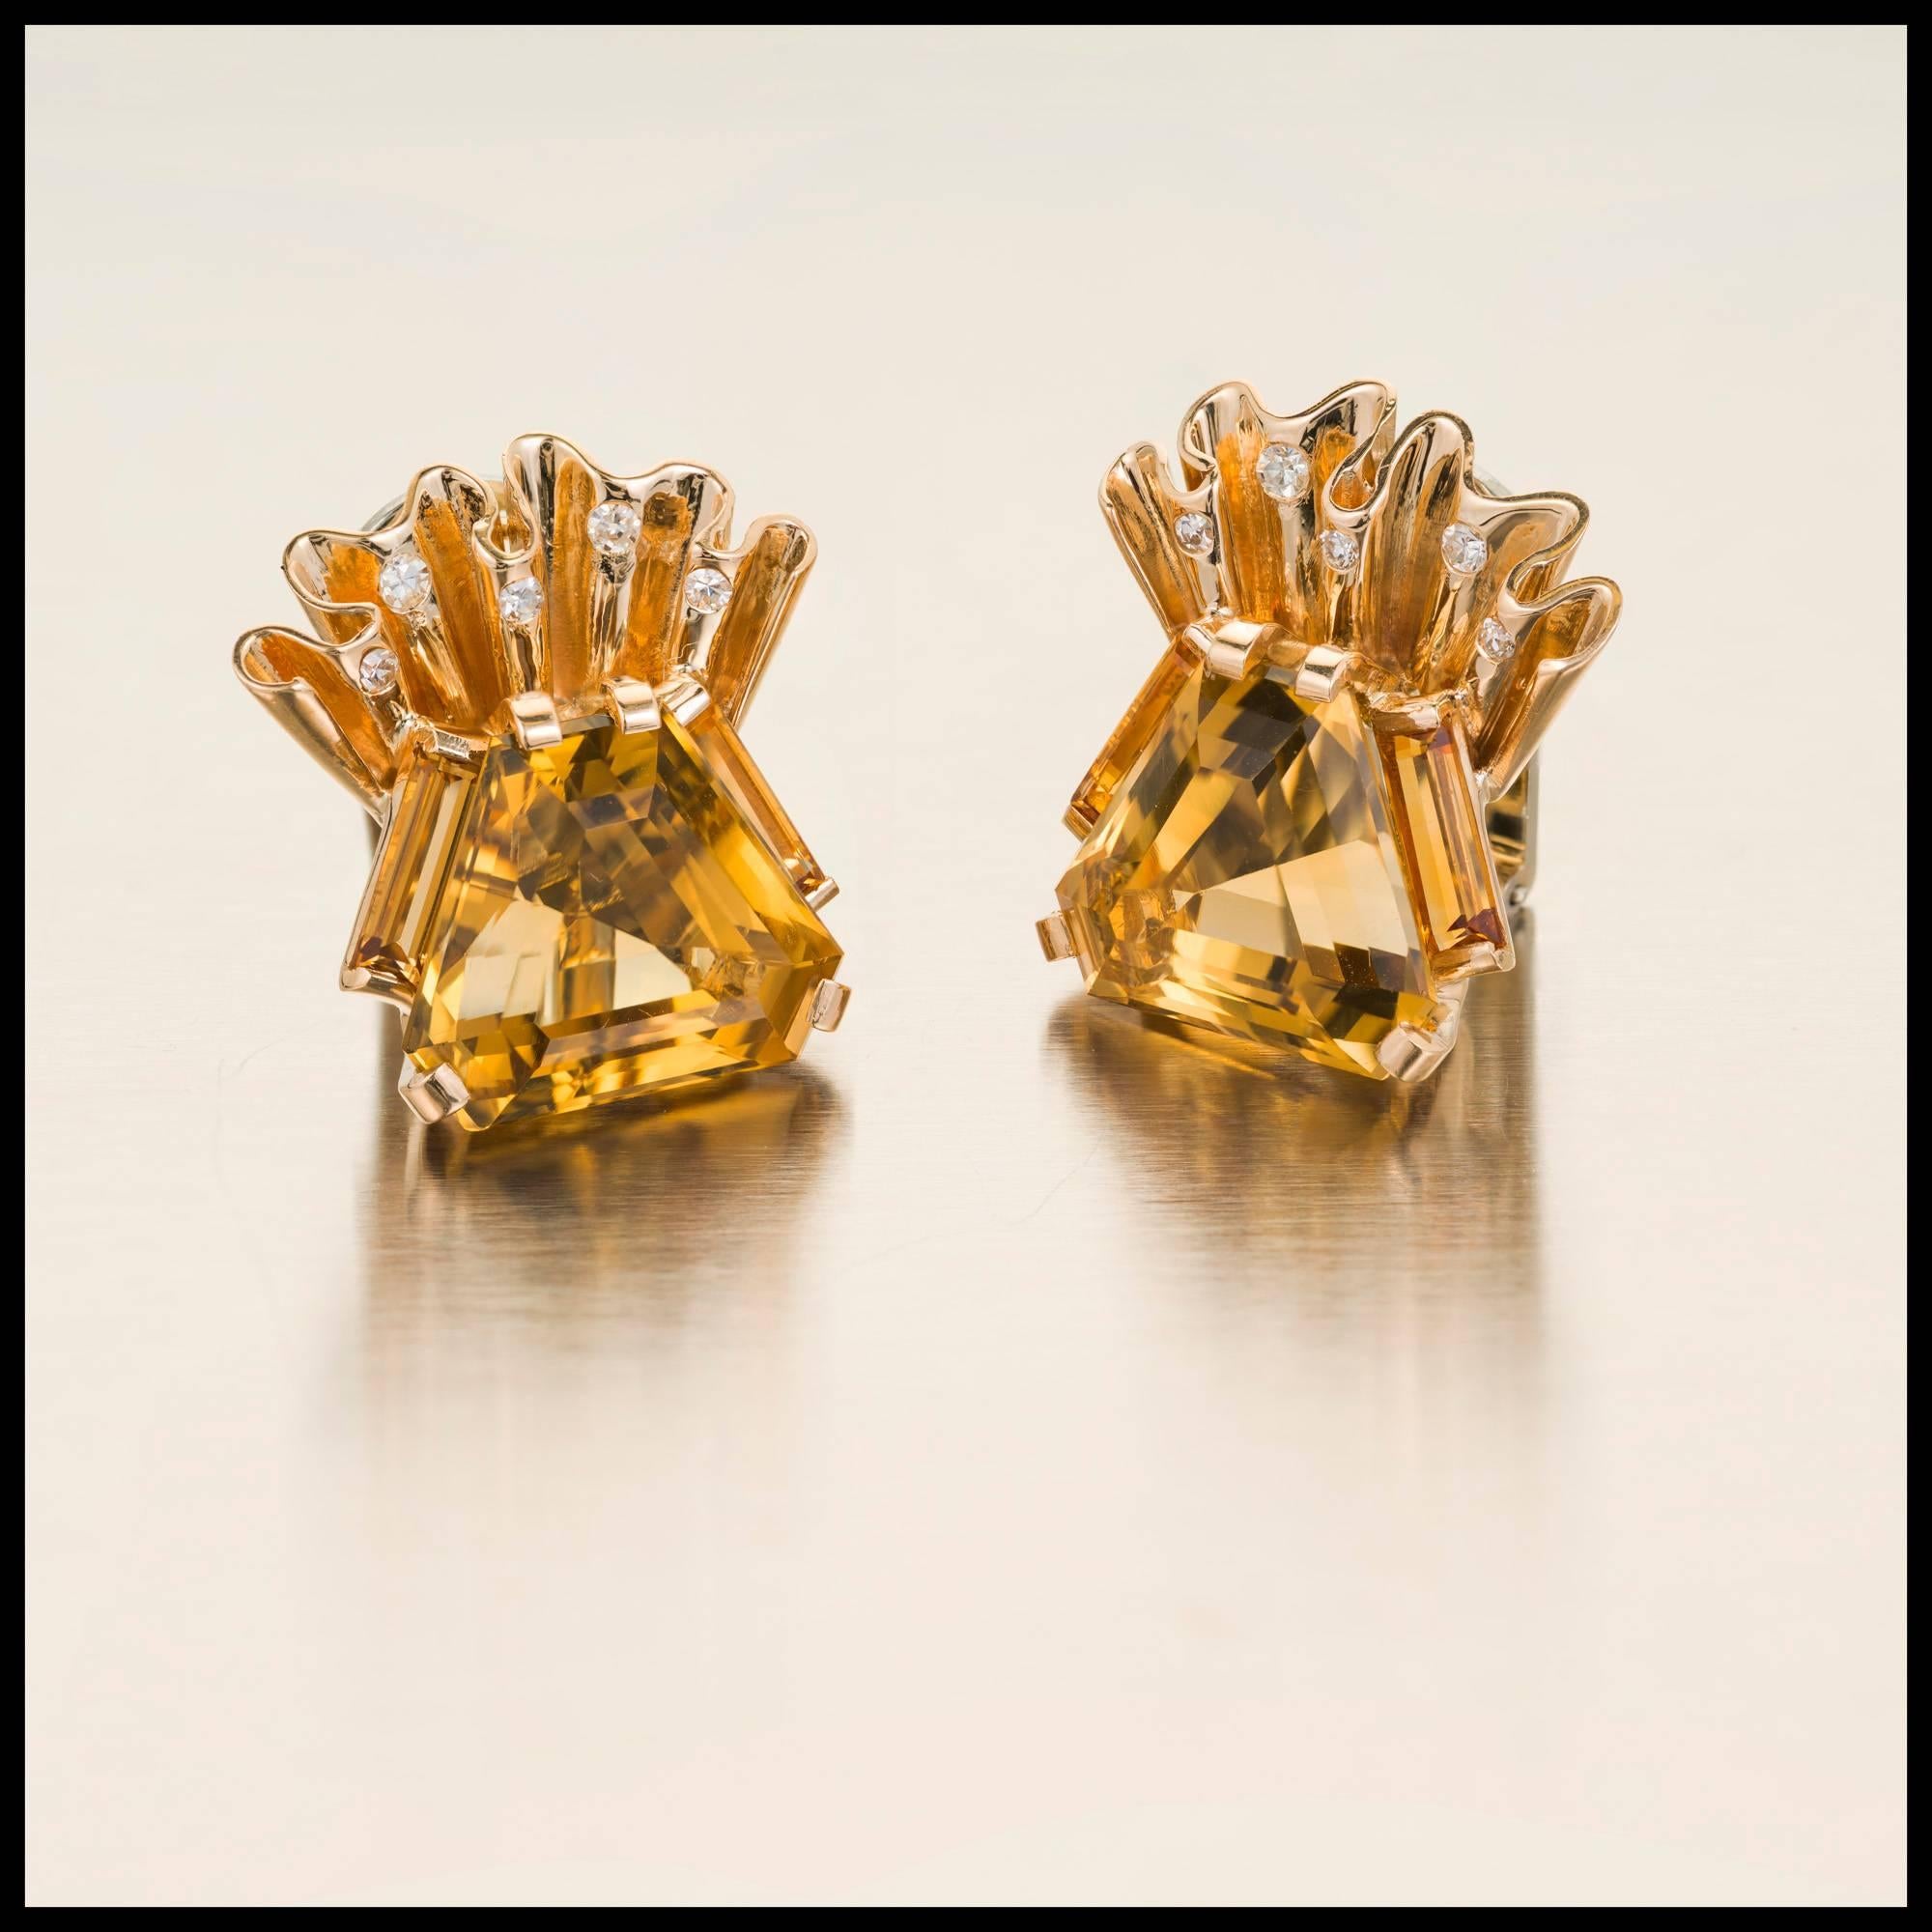 Vintage Retro 1940s hexagon Citrine Diamond earrings with Diamond accents in 14k yellow gold with white gold clips.

2 hexagon yellow Citrines, approx. total weight 8.50cts, 14 x 12mm
10 round Diamonds, approx. total weight .14cts, H, SI1
14k yellow